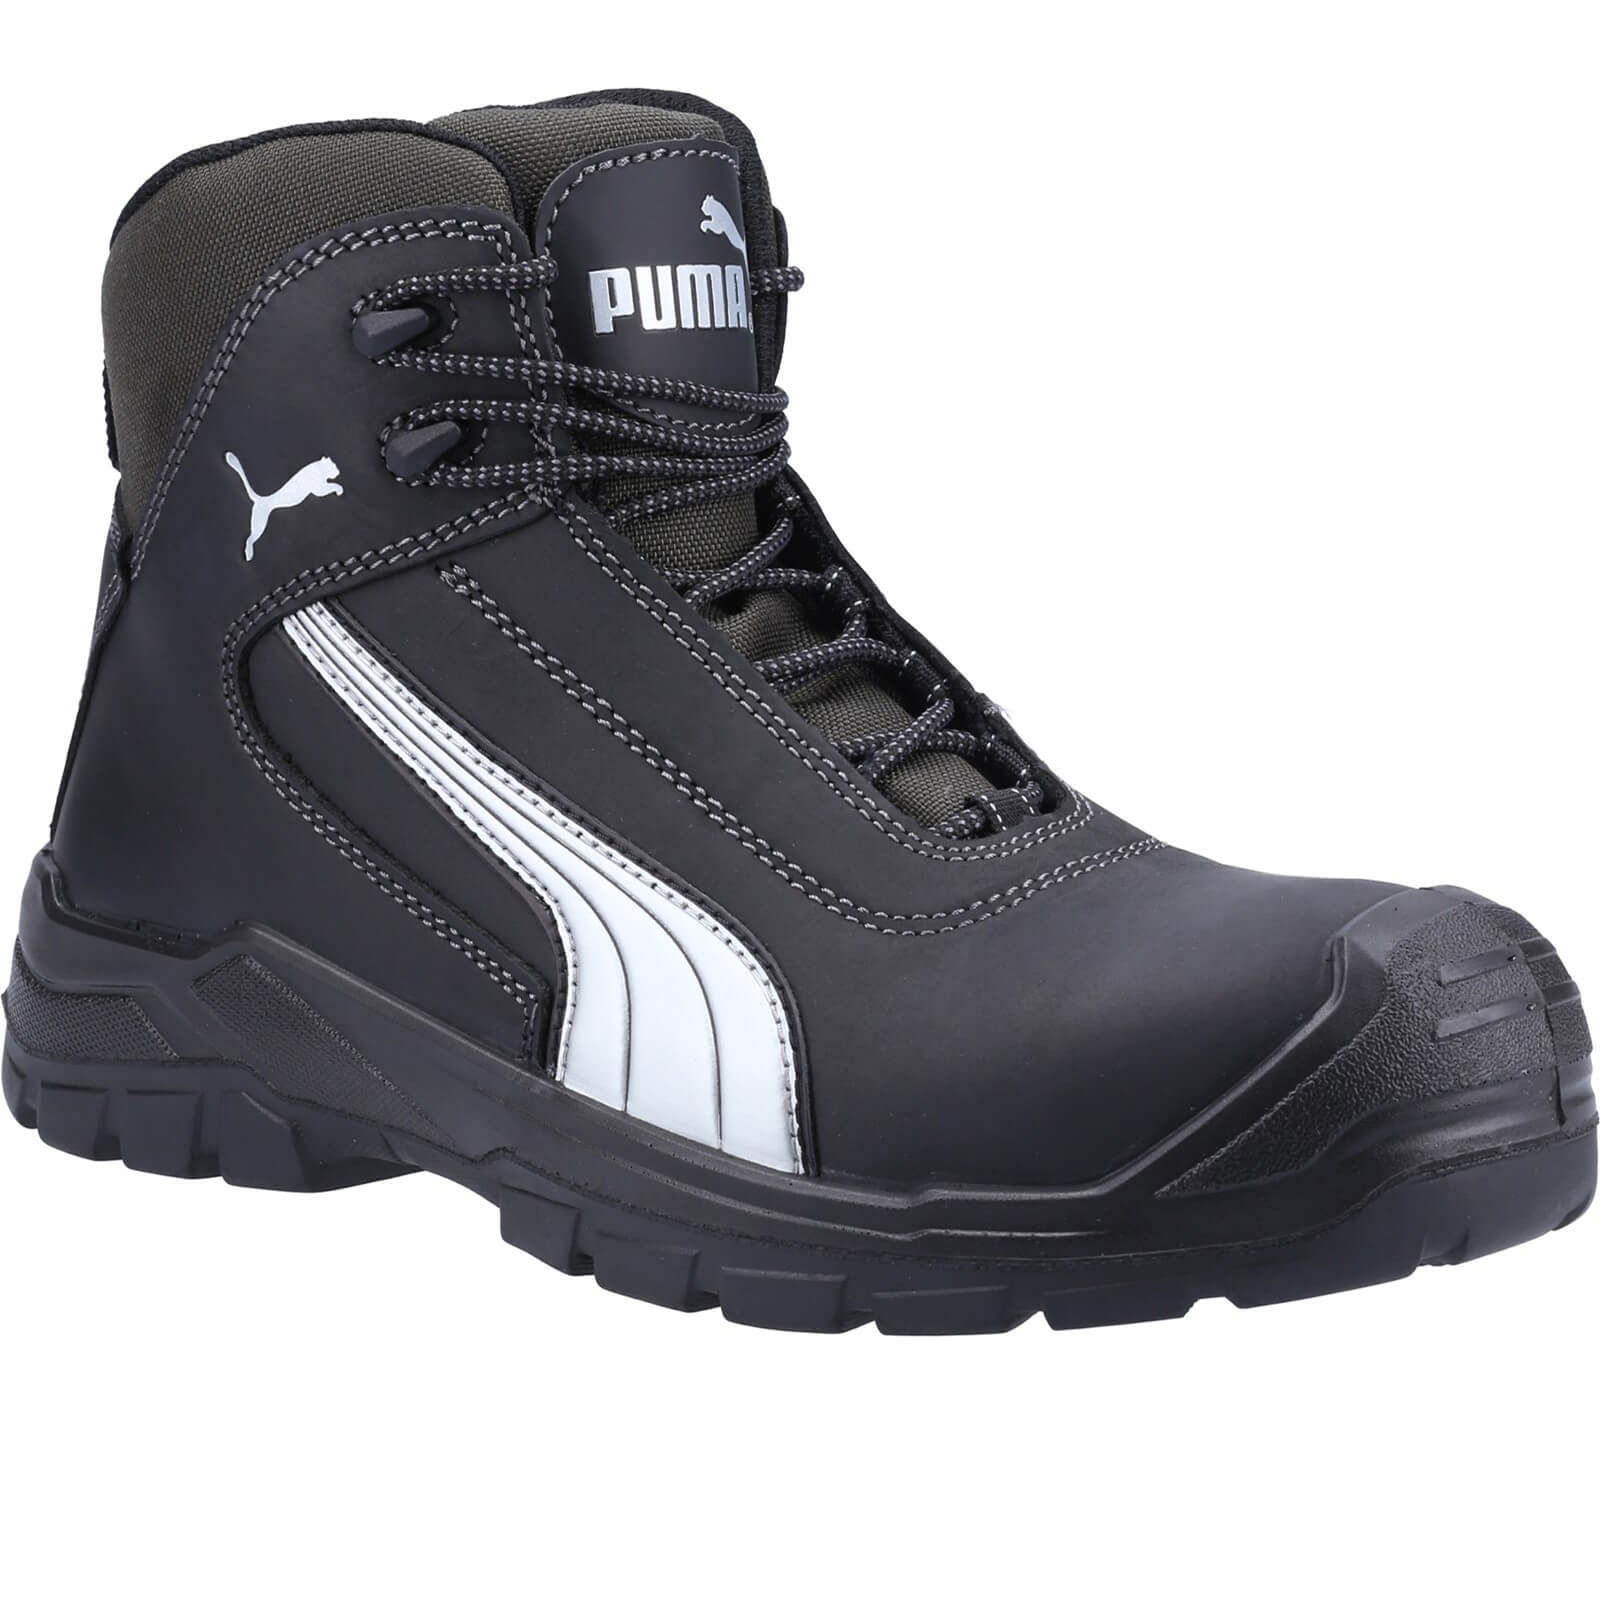 Puma Mens Safety Cascades Mid Safety Boots Black Size 10